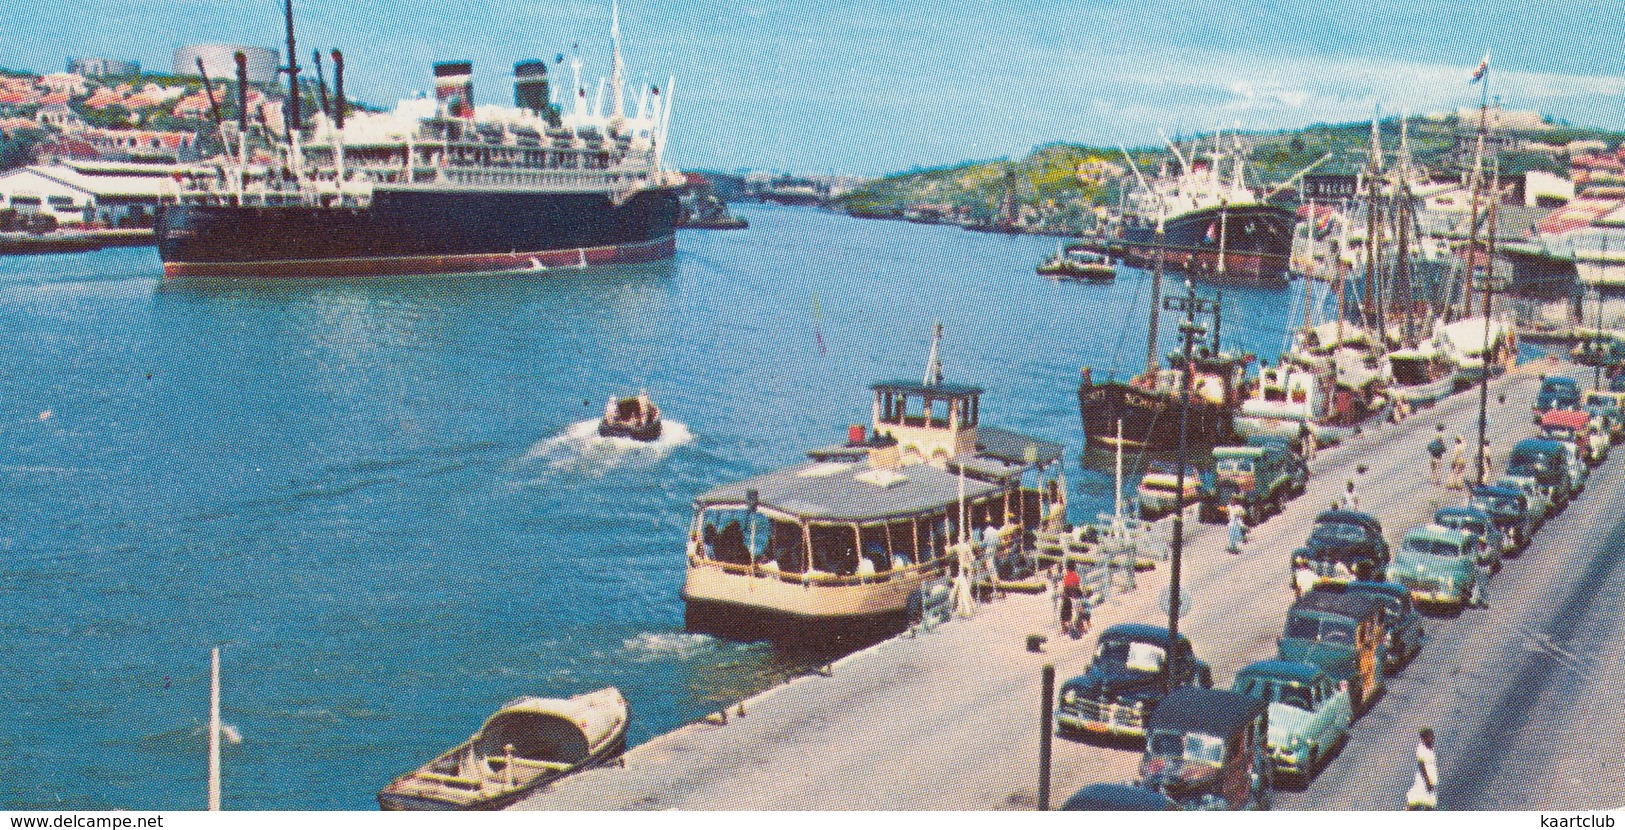 Willemstad: CHRYSLER '50, PLYMOUTH BELVEDERE, FORD WOODY STATION WAGON '48 - STEAMER - Harbor View - (Curacao, N.A.) - Toerisme